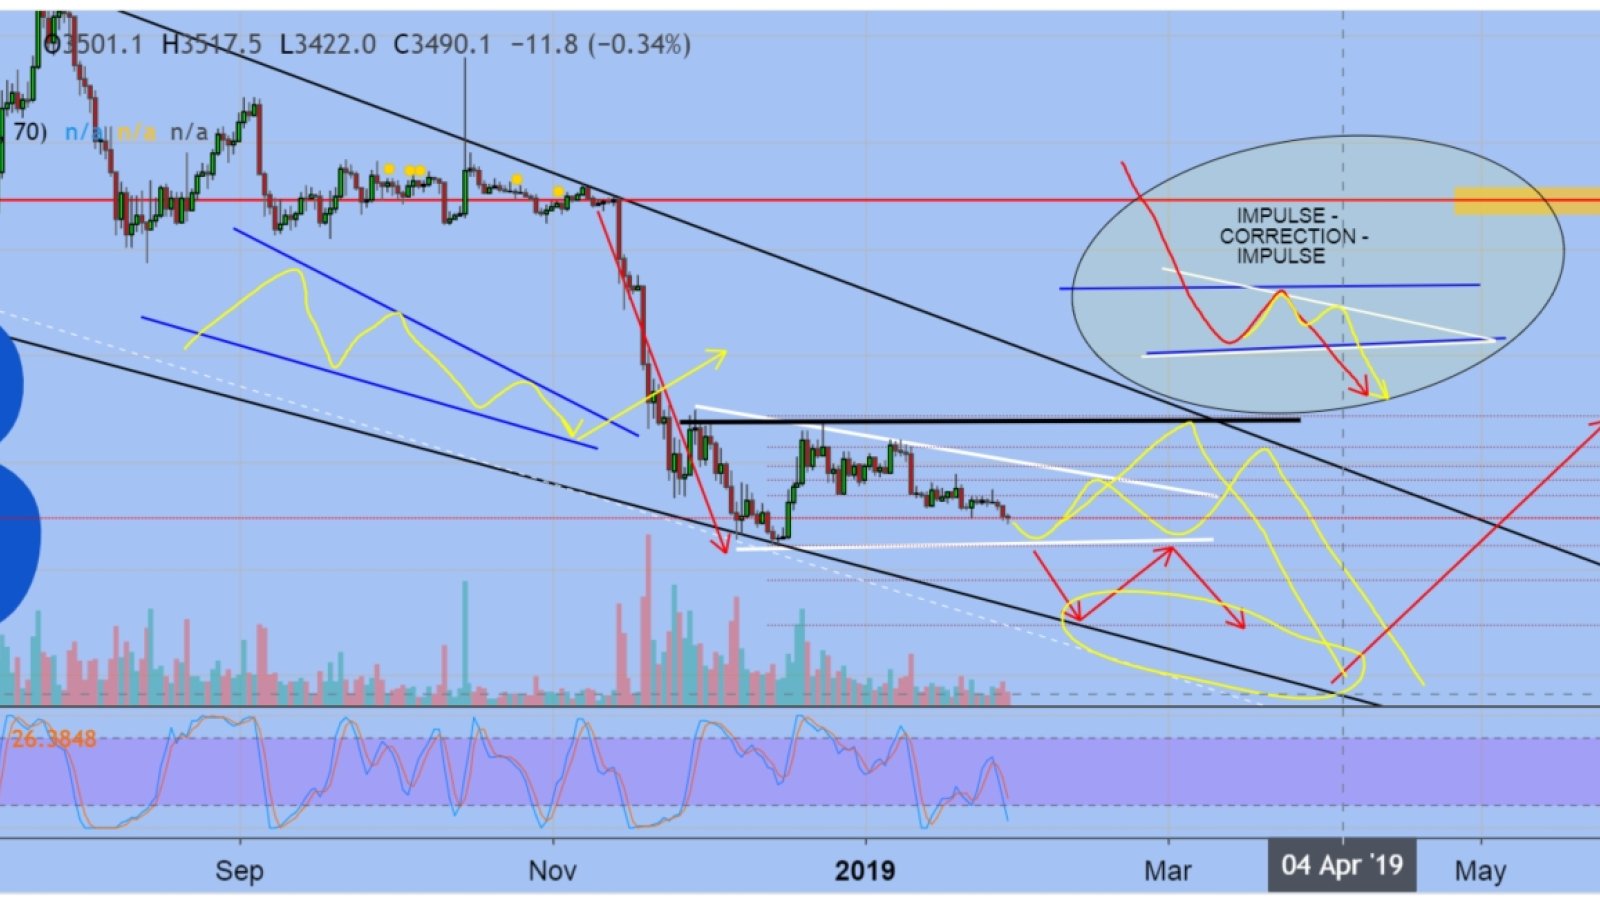 The downtrend is likely to continue until BTC reaches support line